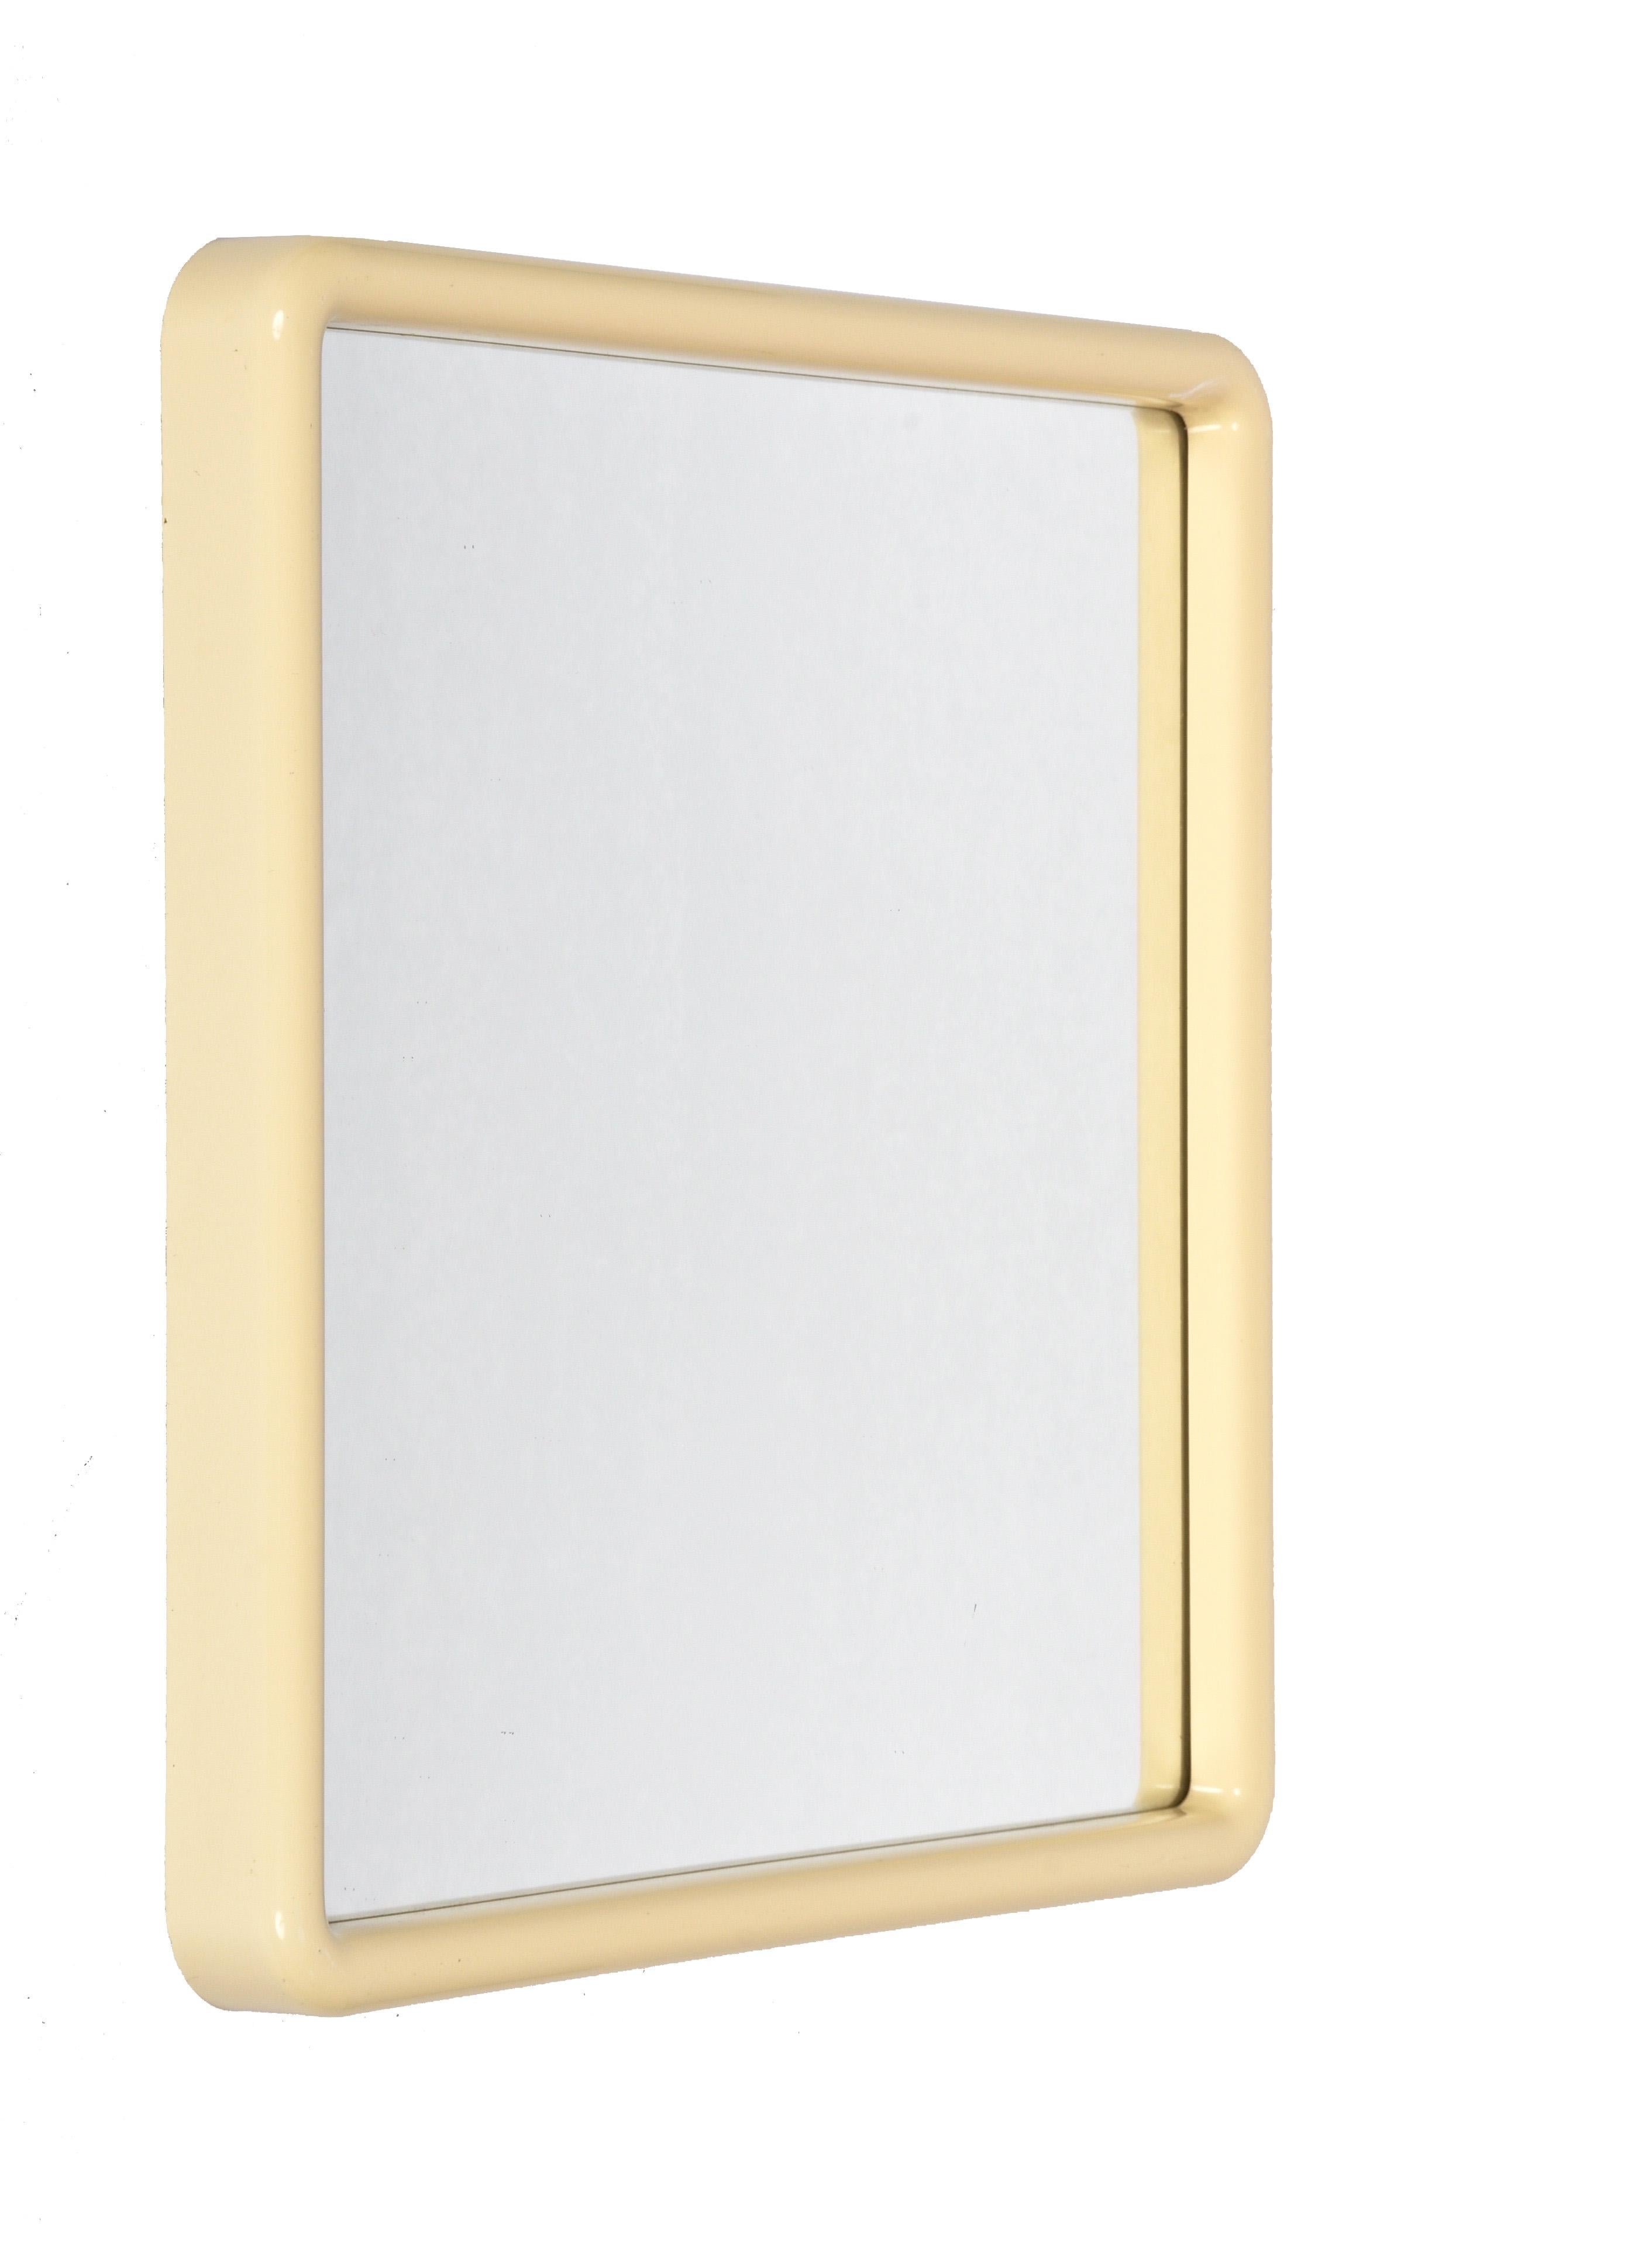 Pair of midcentury ivory white plastic-framed squared mirrors. These fantastic mirrors were designed in Italy during the 1980s.

The pure plastic frame with its colour and shape is a perfect synthesis of the Italian design of the 80s.

Due to